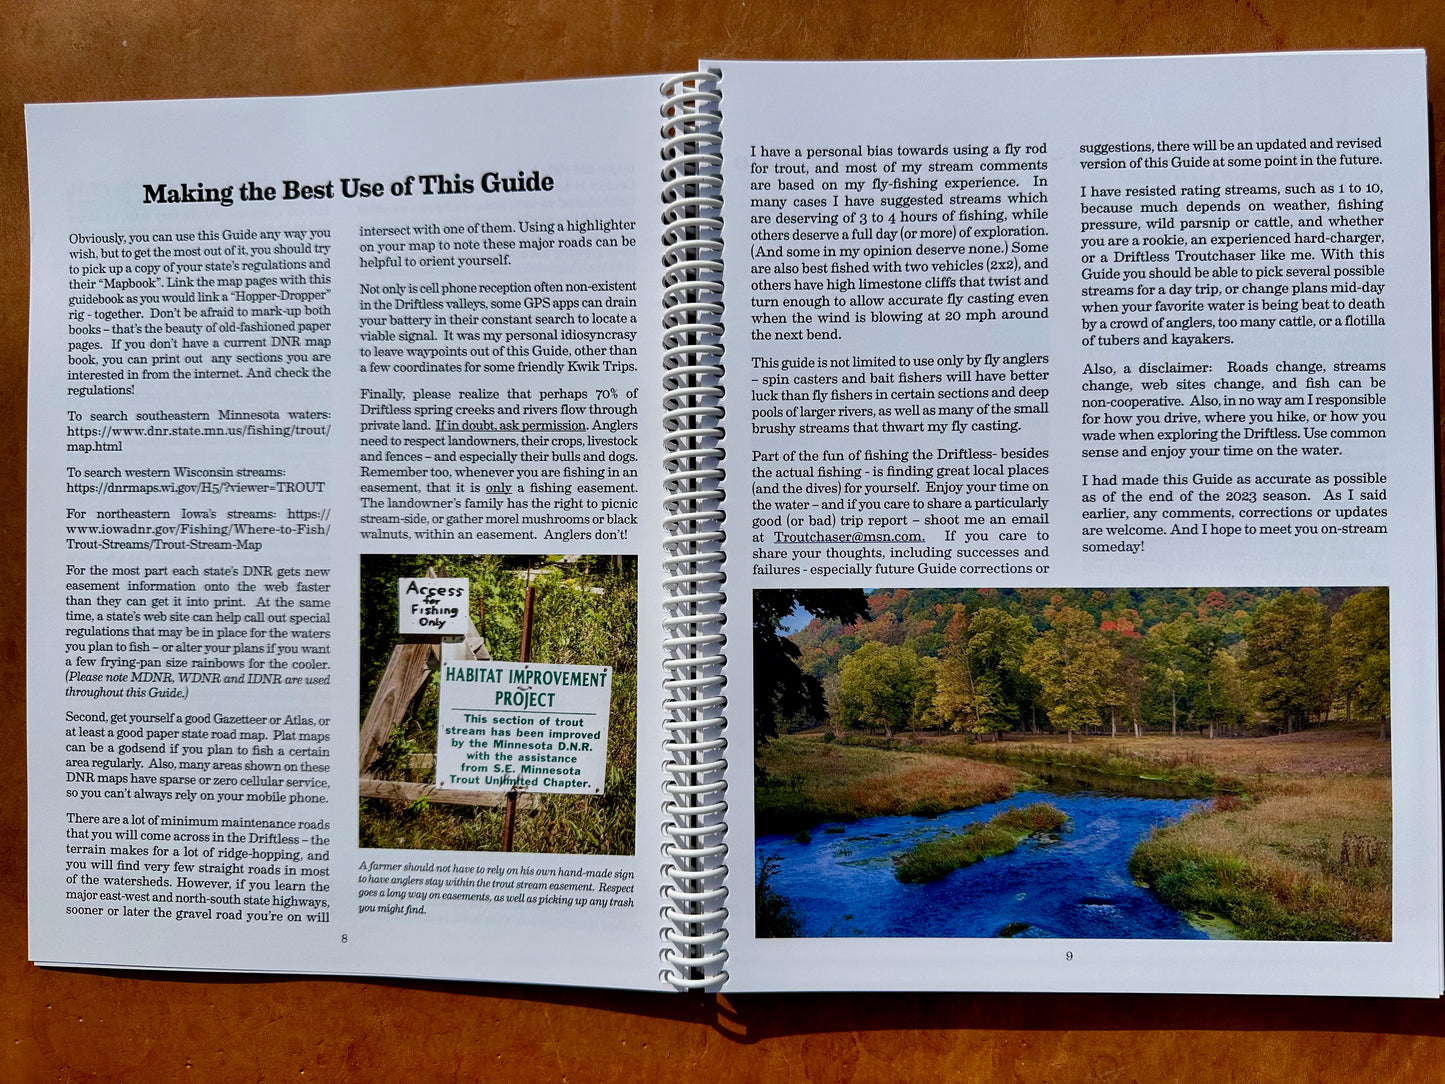 Trout Fishing the Driftless Area (Book)